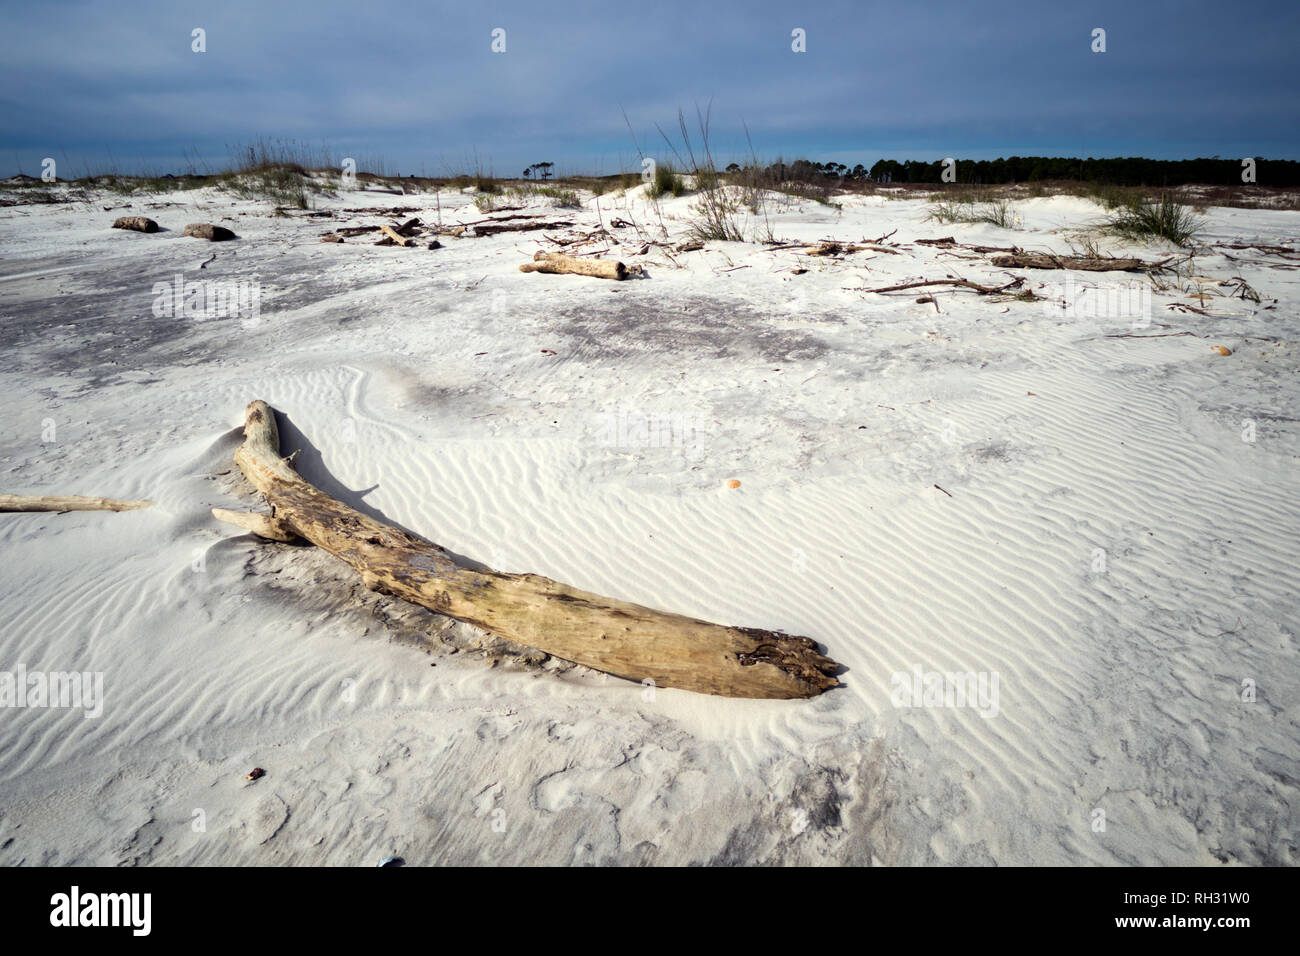 Driftwood washed up on the beach near Fort Morgan, Alabama. Stock Photo